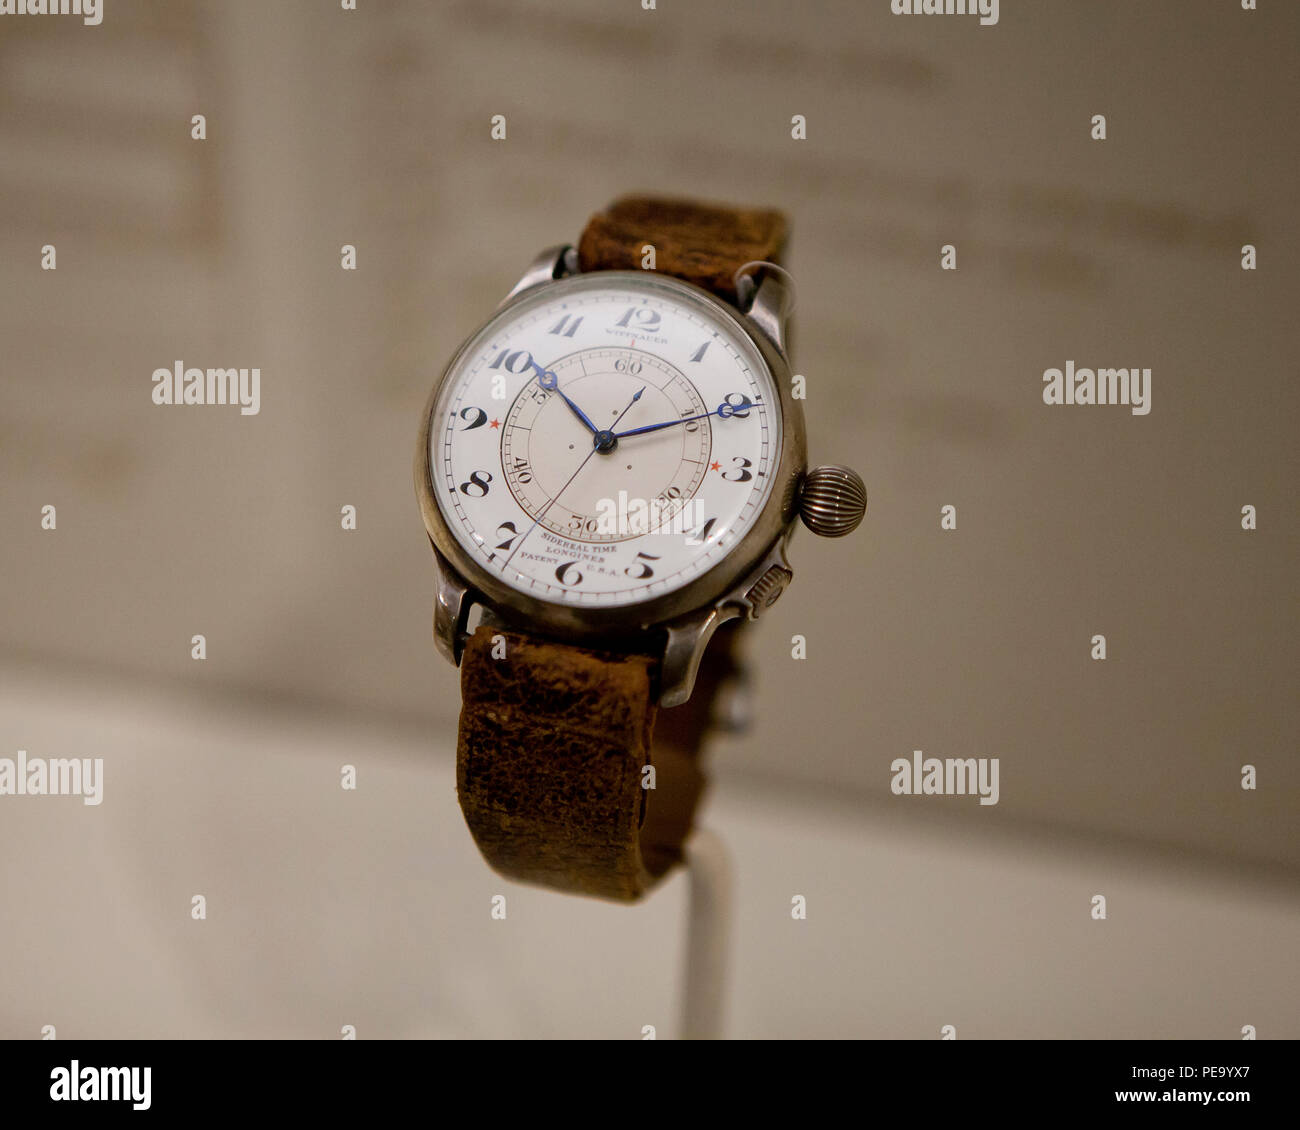 Longines-Wittnauer Weems sidereal time model second-setting watch - USA Stock Photo